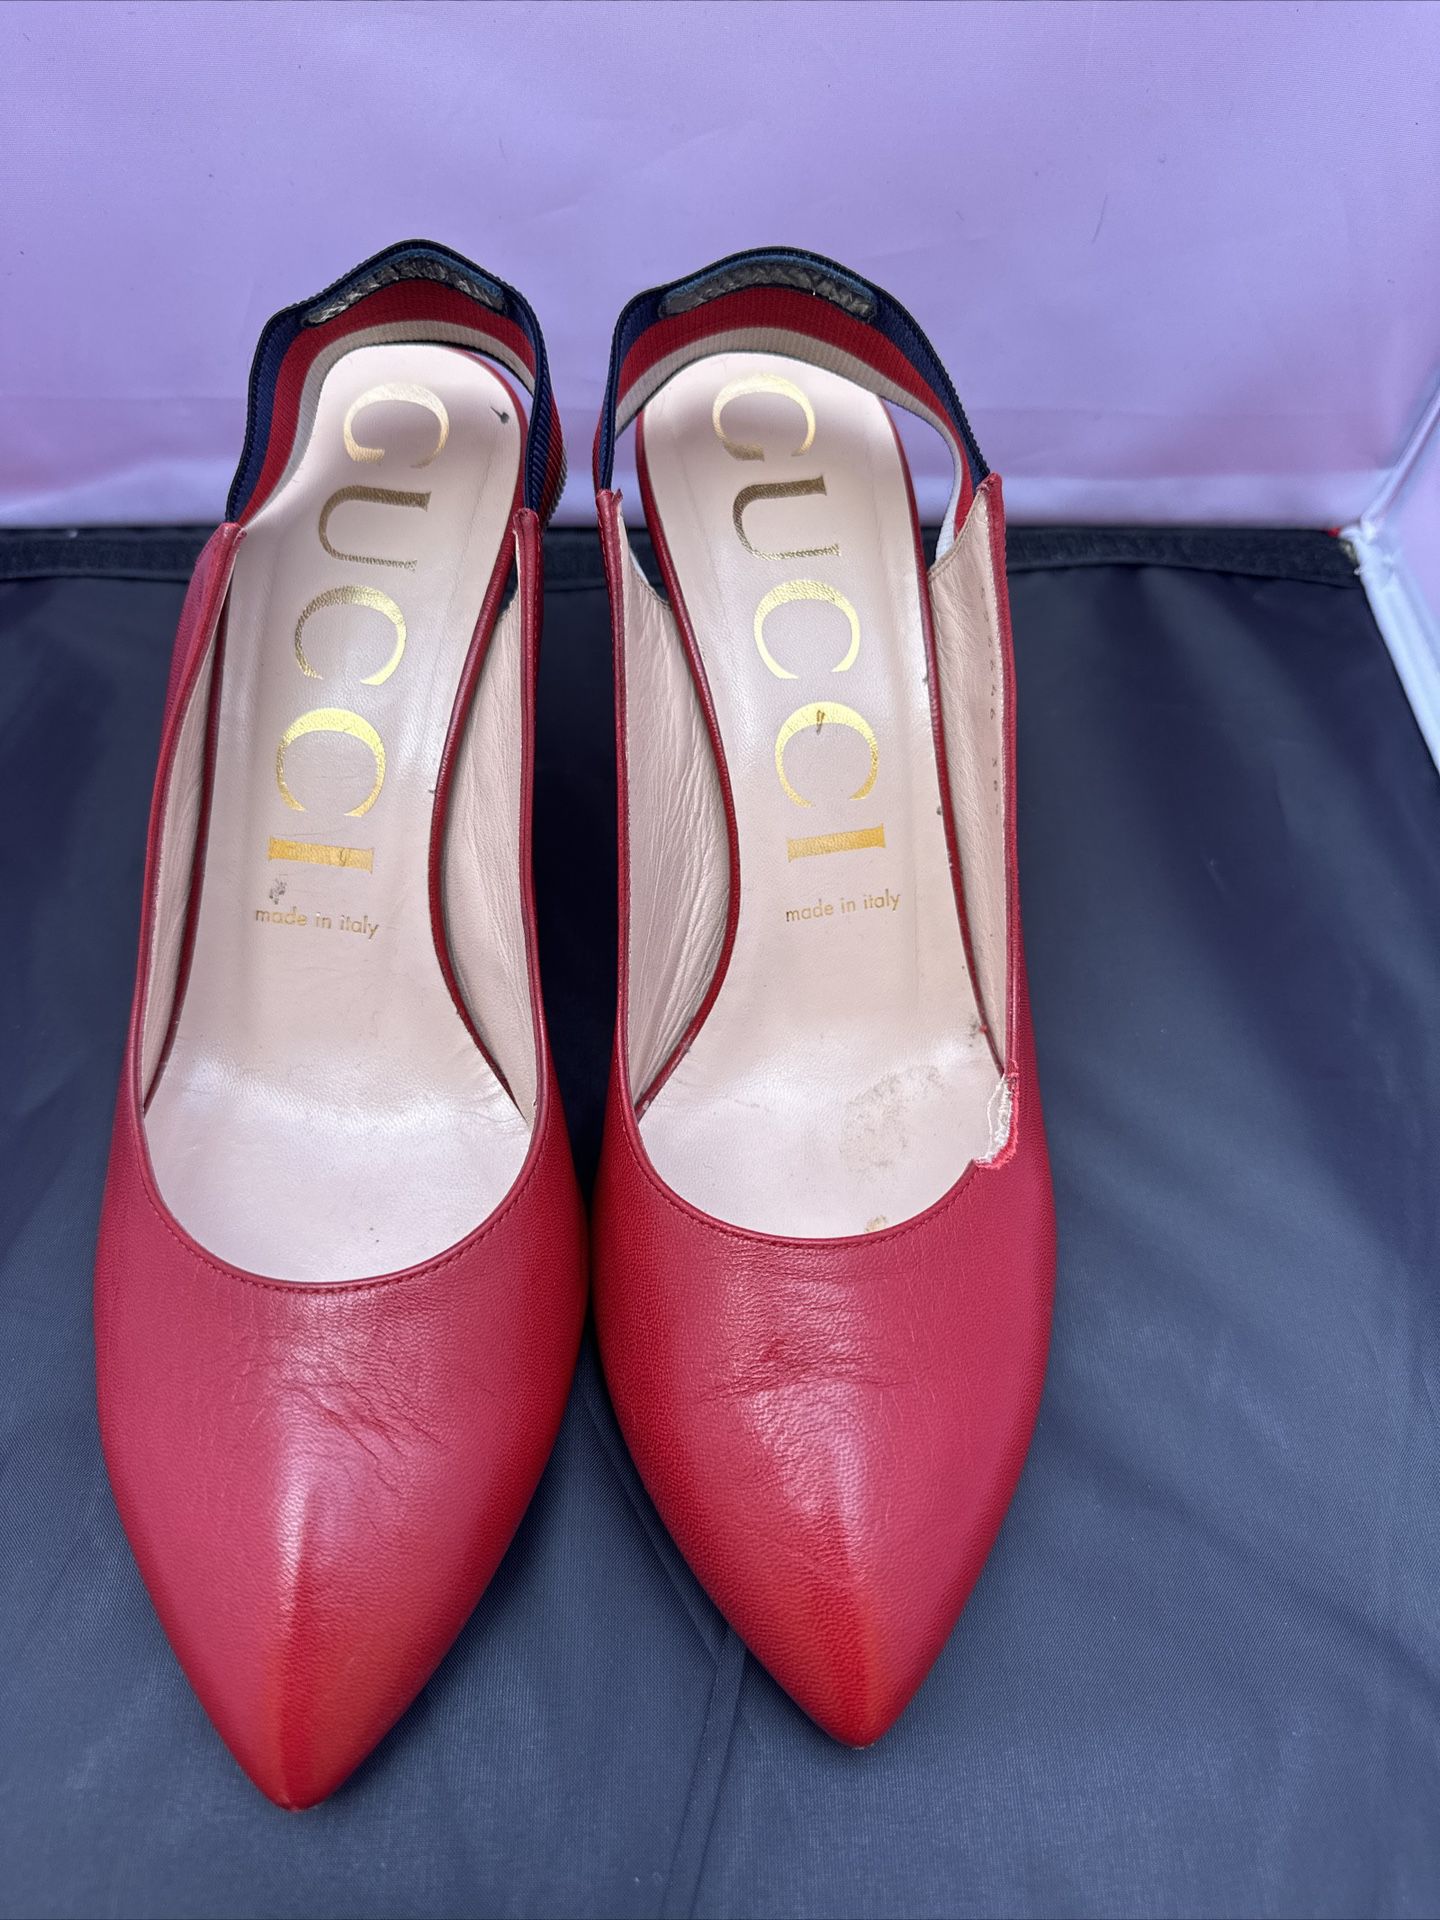 Authentic gucci women sandal red slingback heel